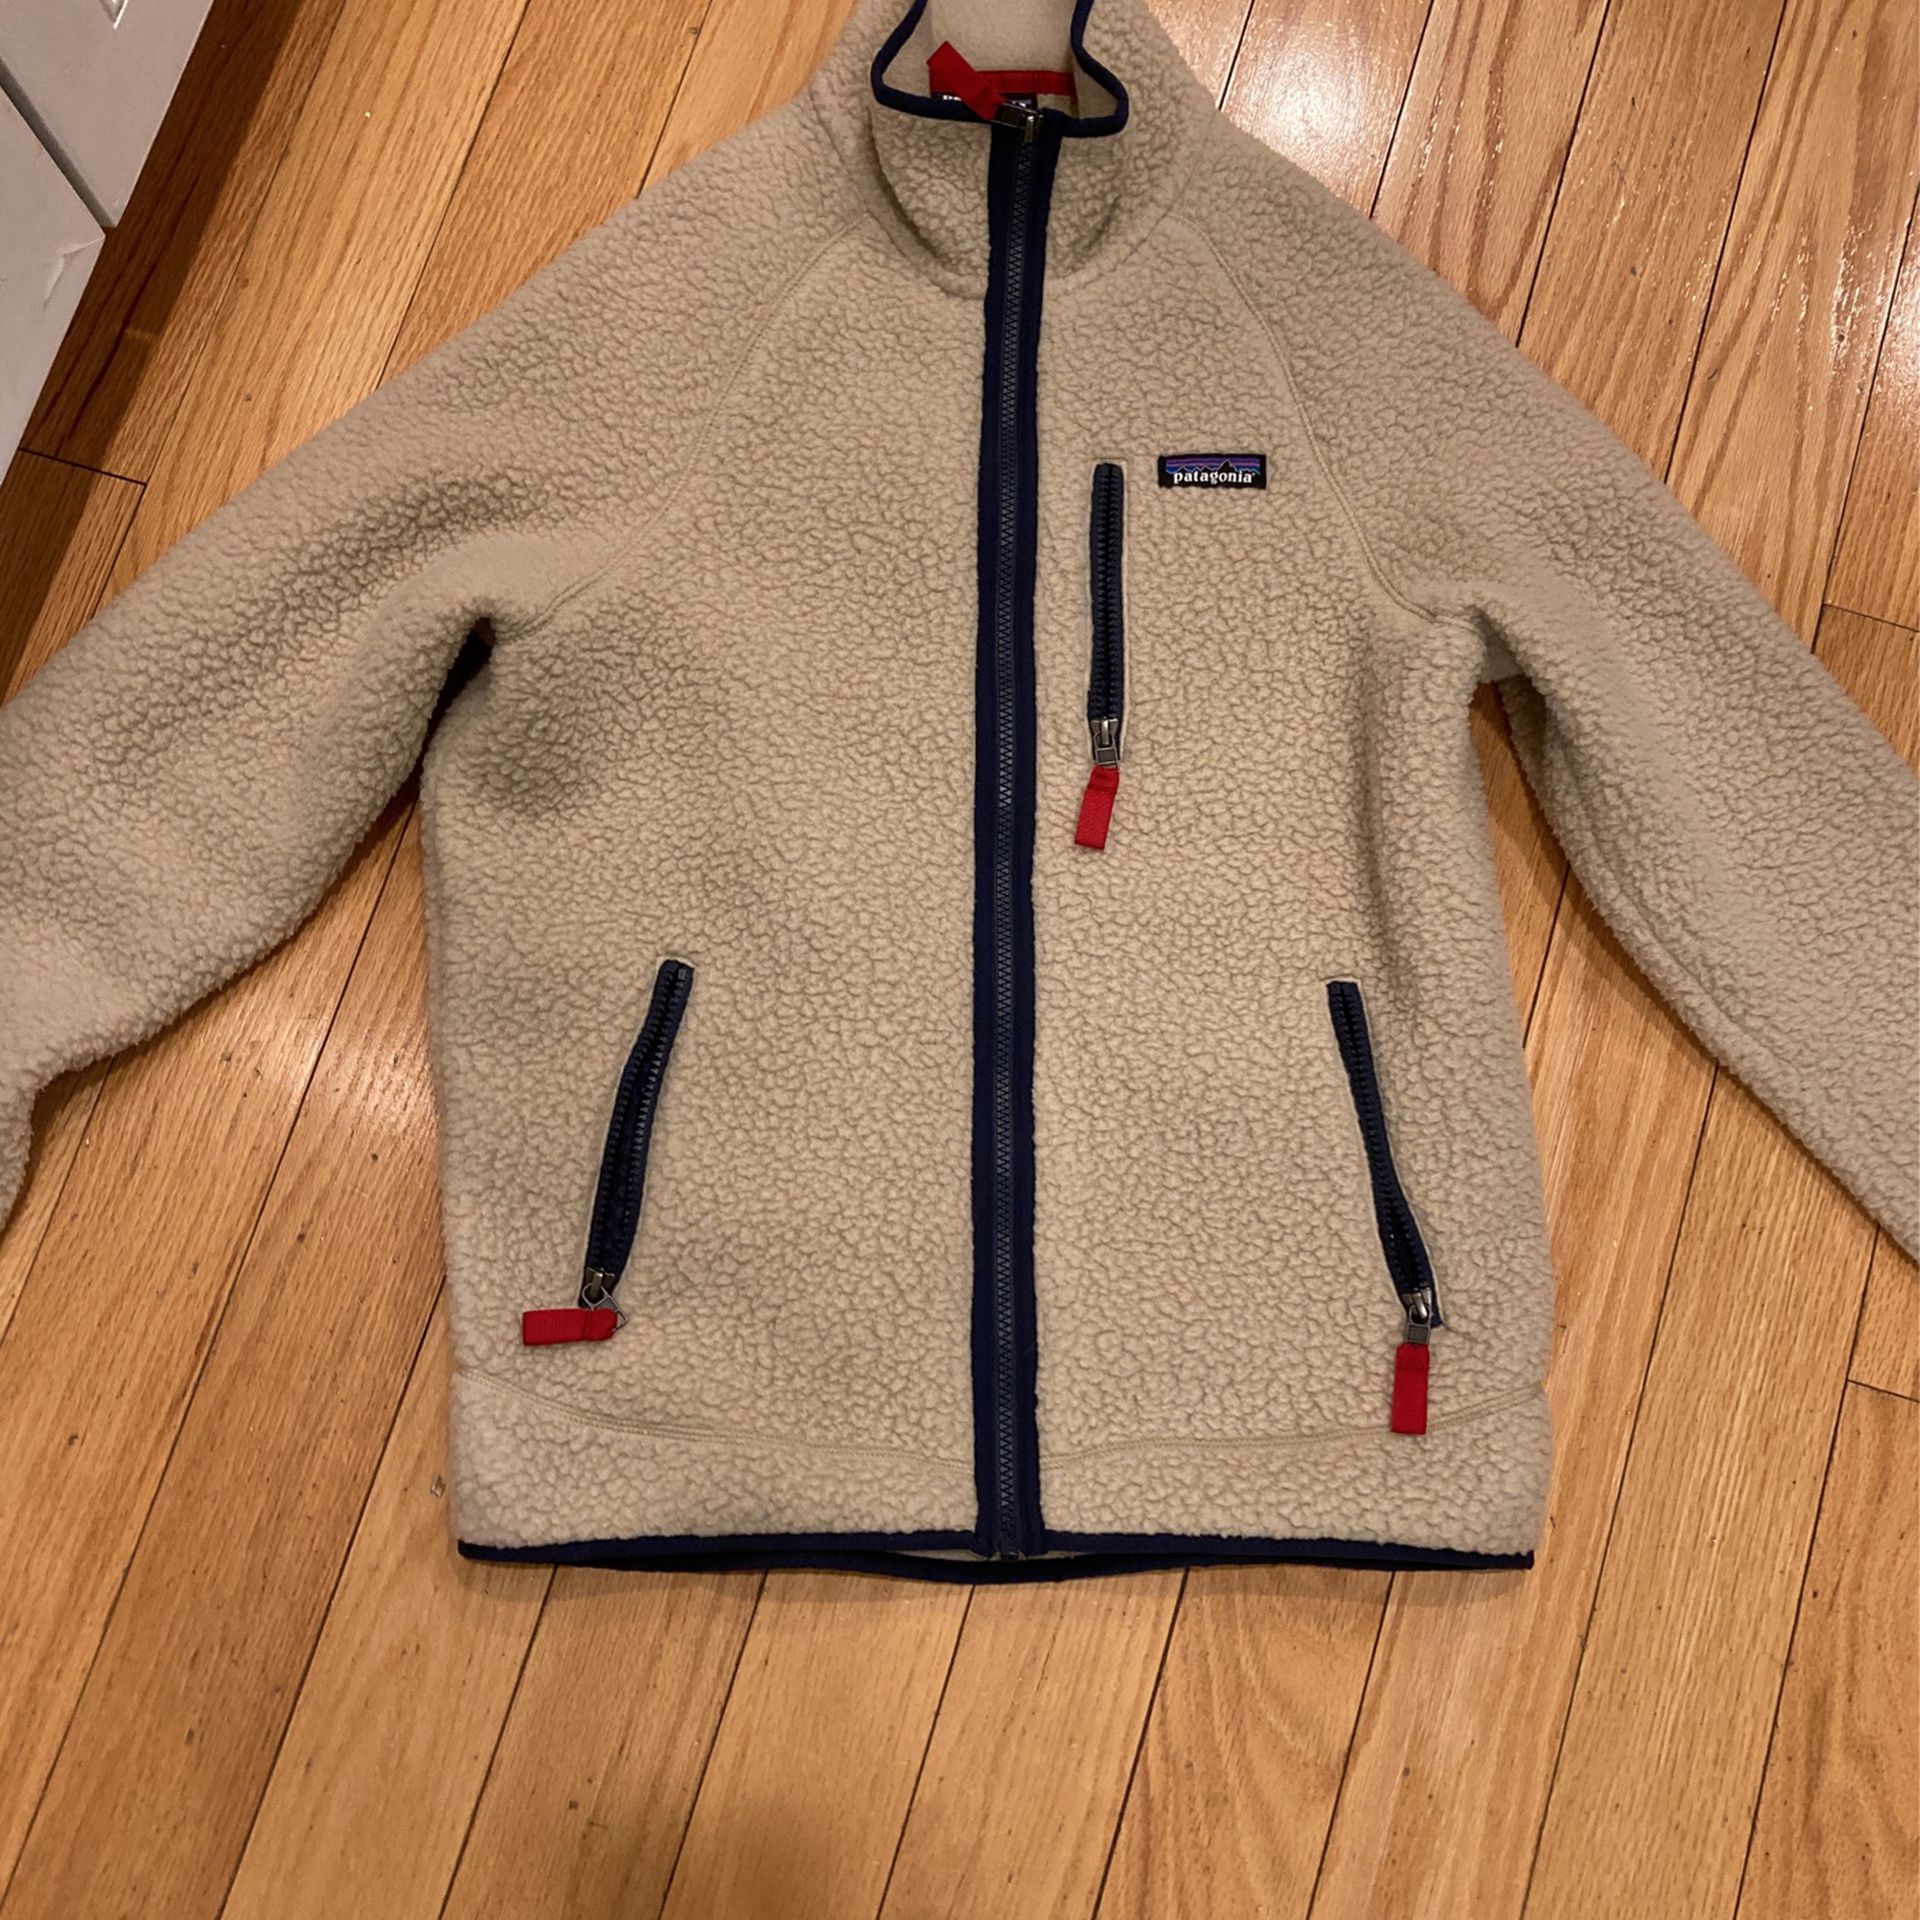 PATAGONIA WOMENS s SMALL